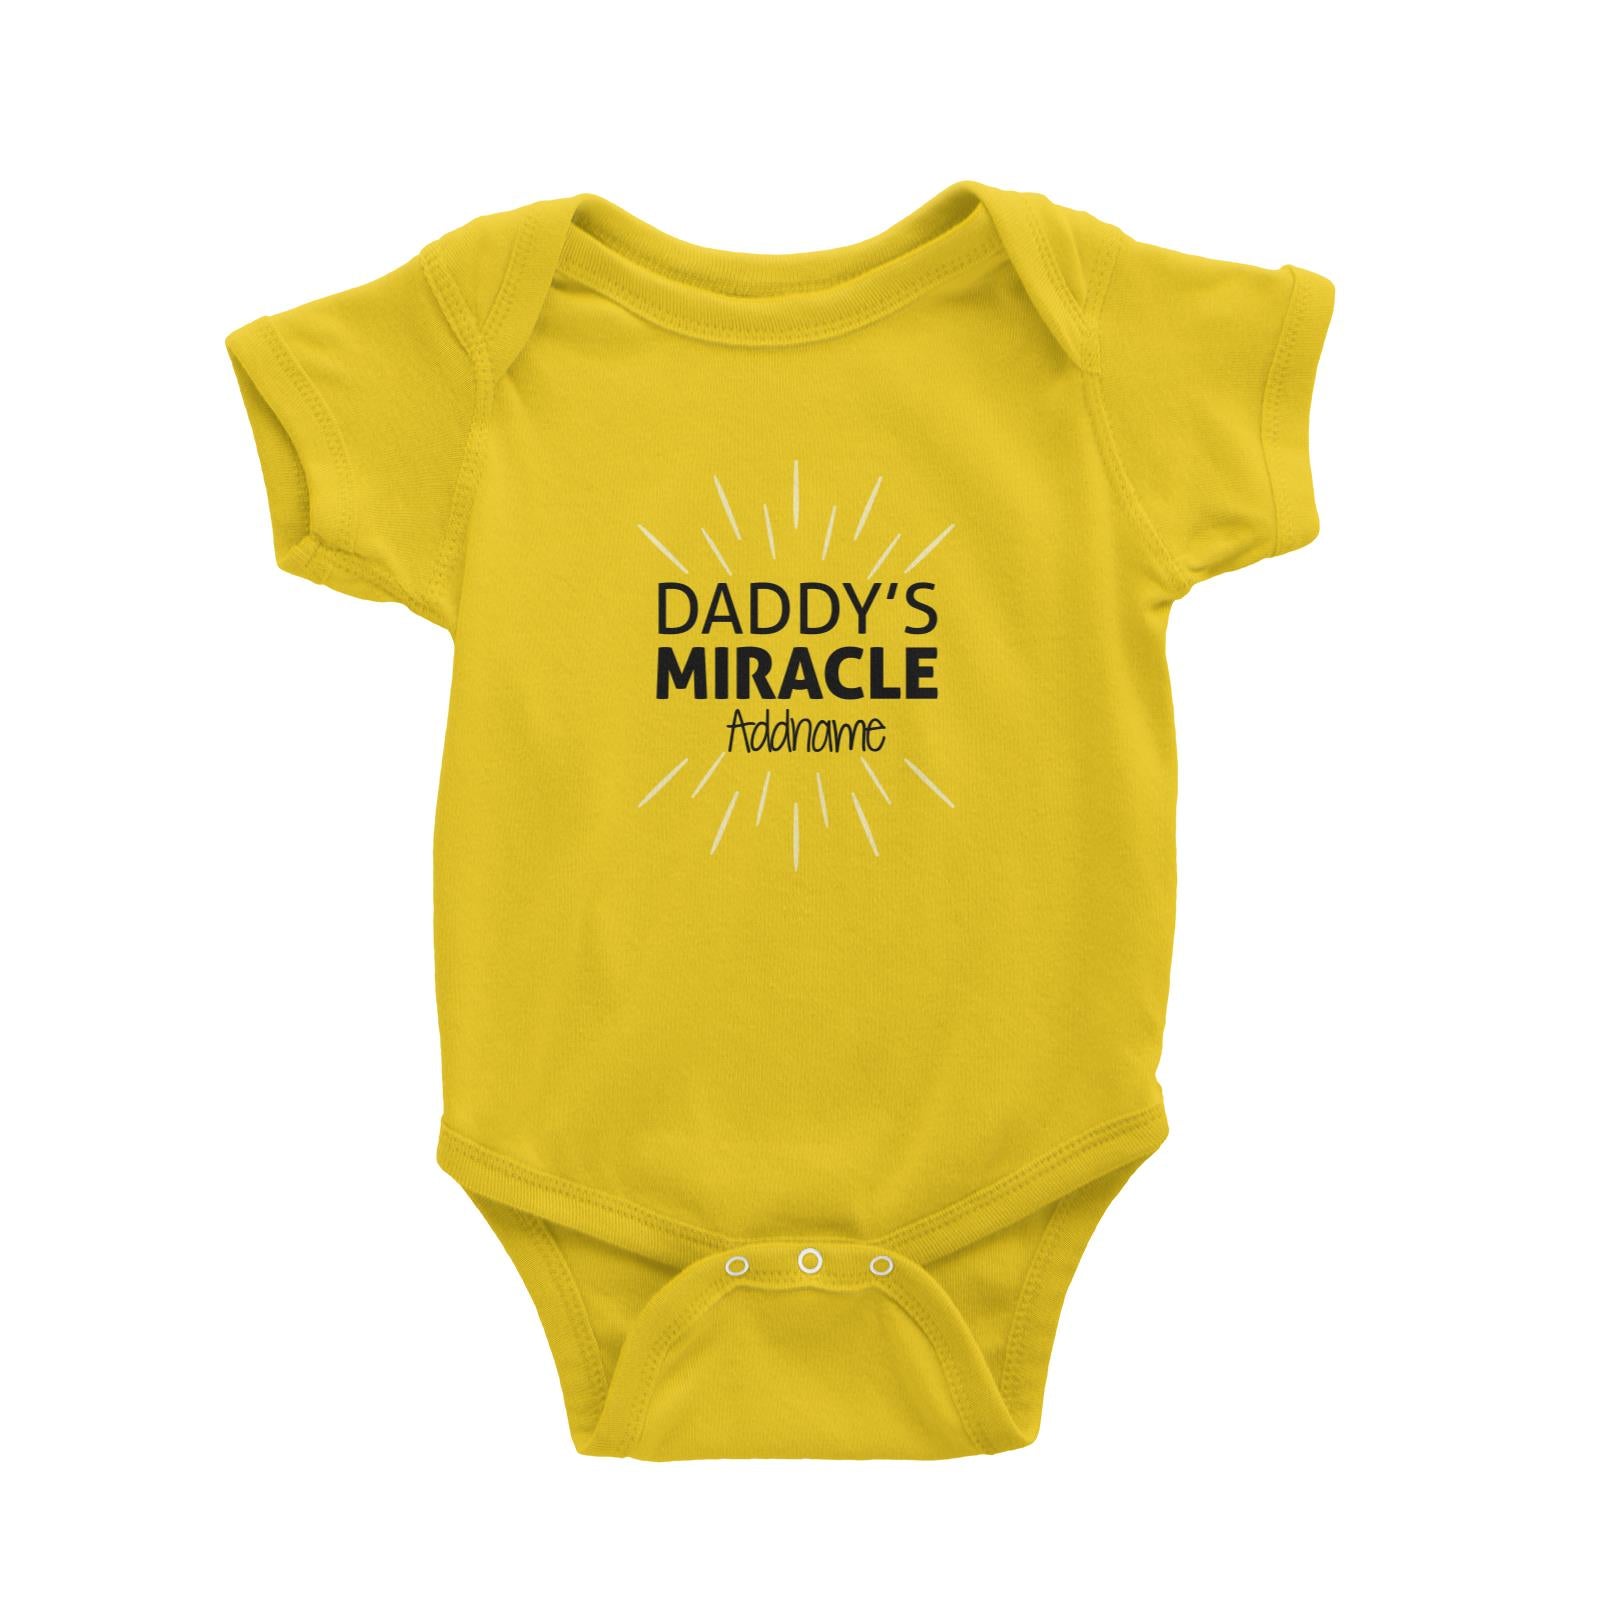 Daddys Miracle Addname Baby Romper